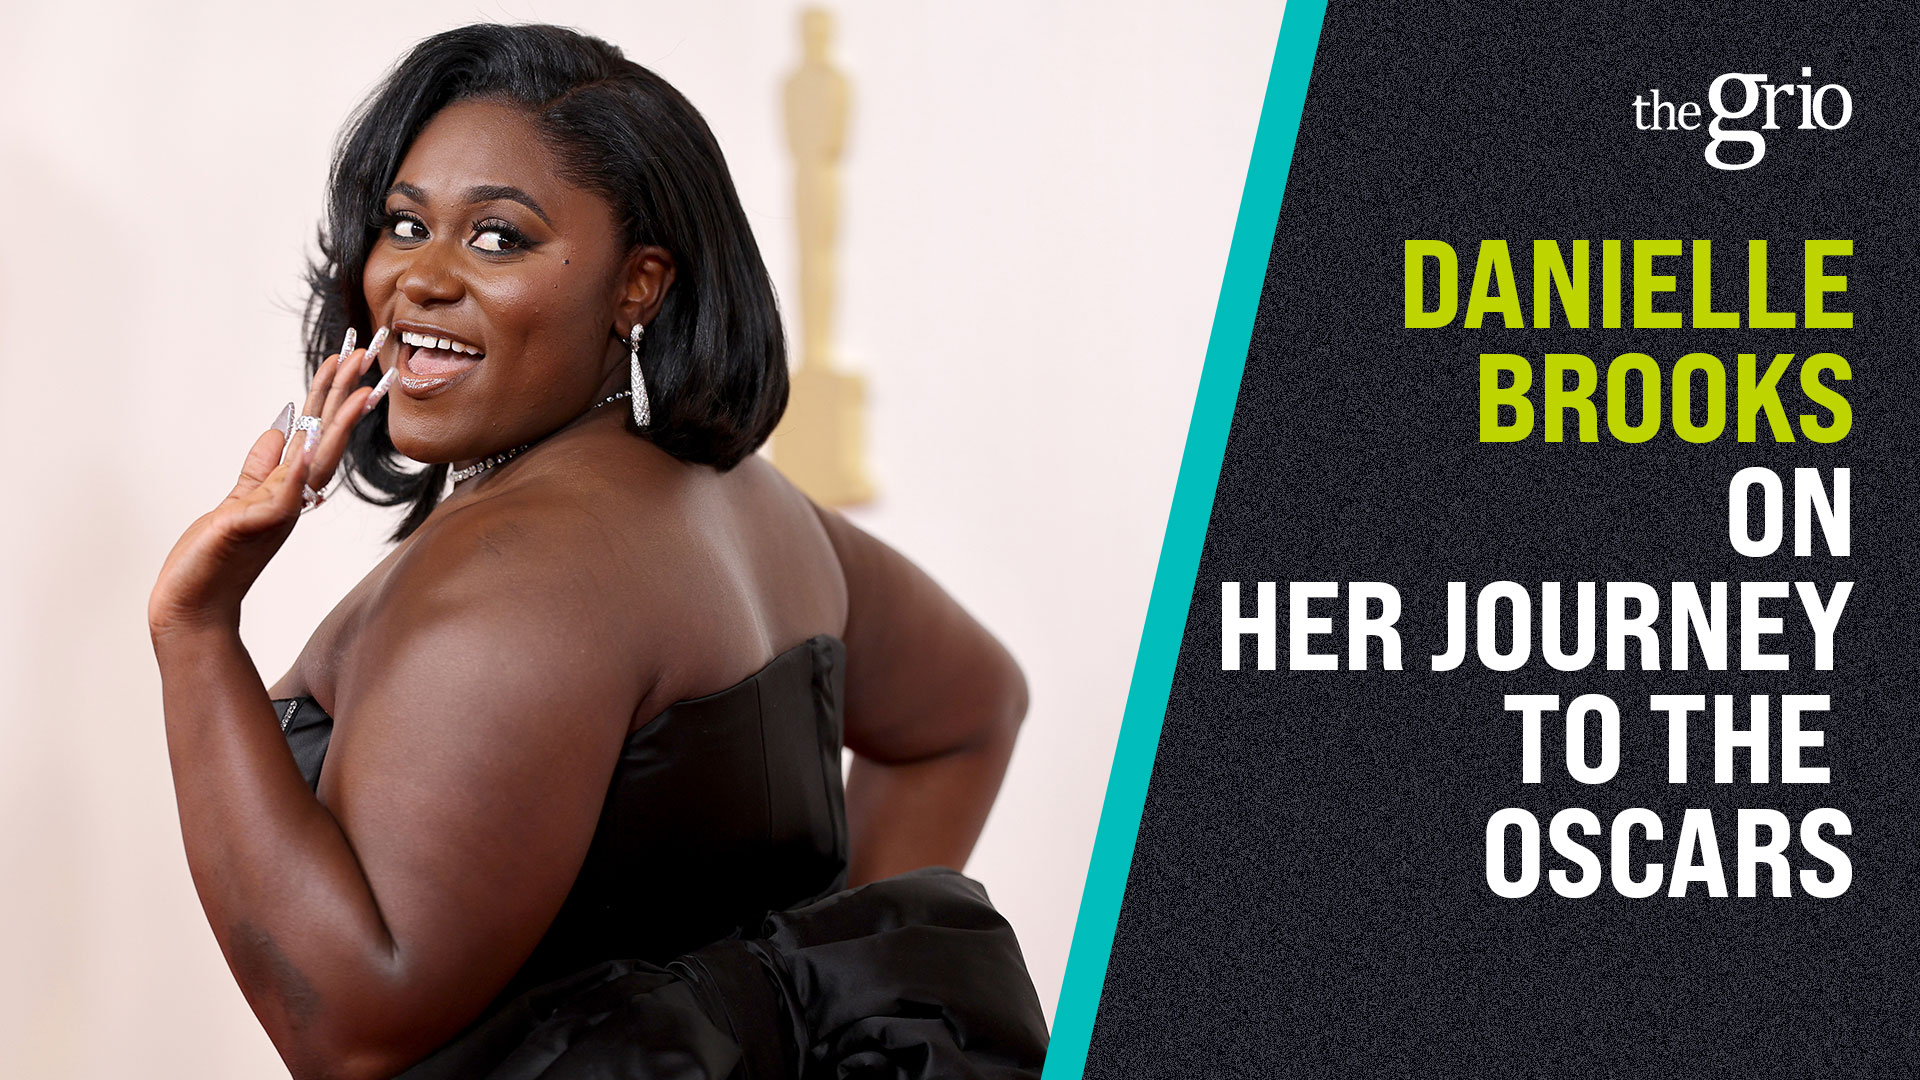 Watch: Danielle Brooks on her journey to the Oscars